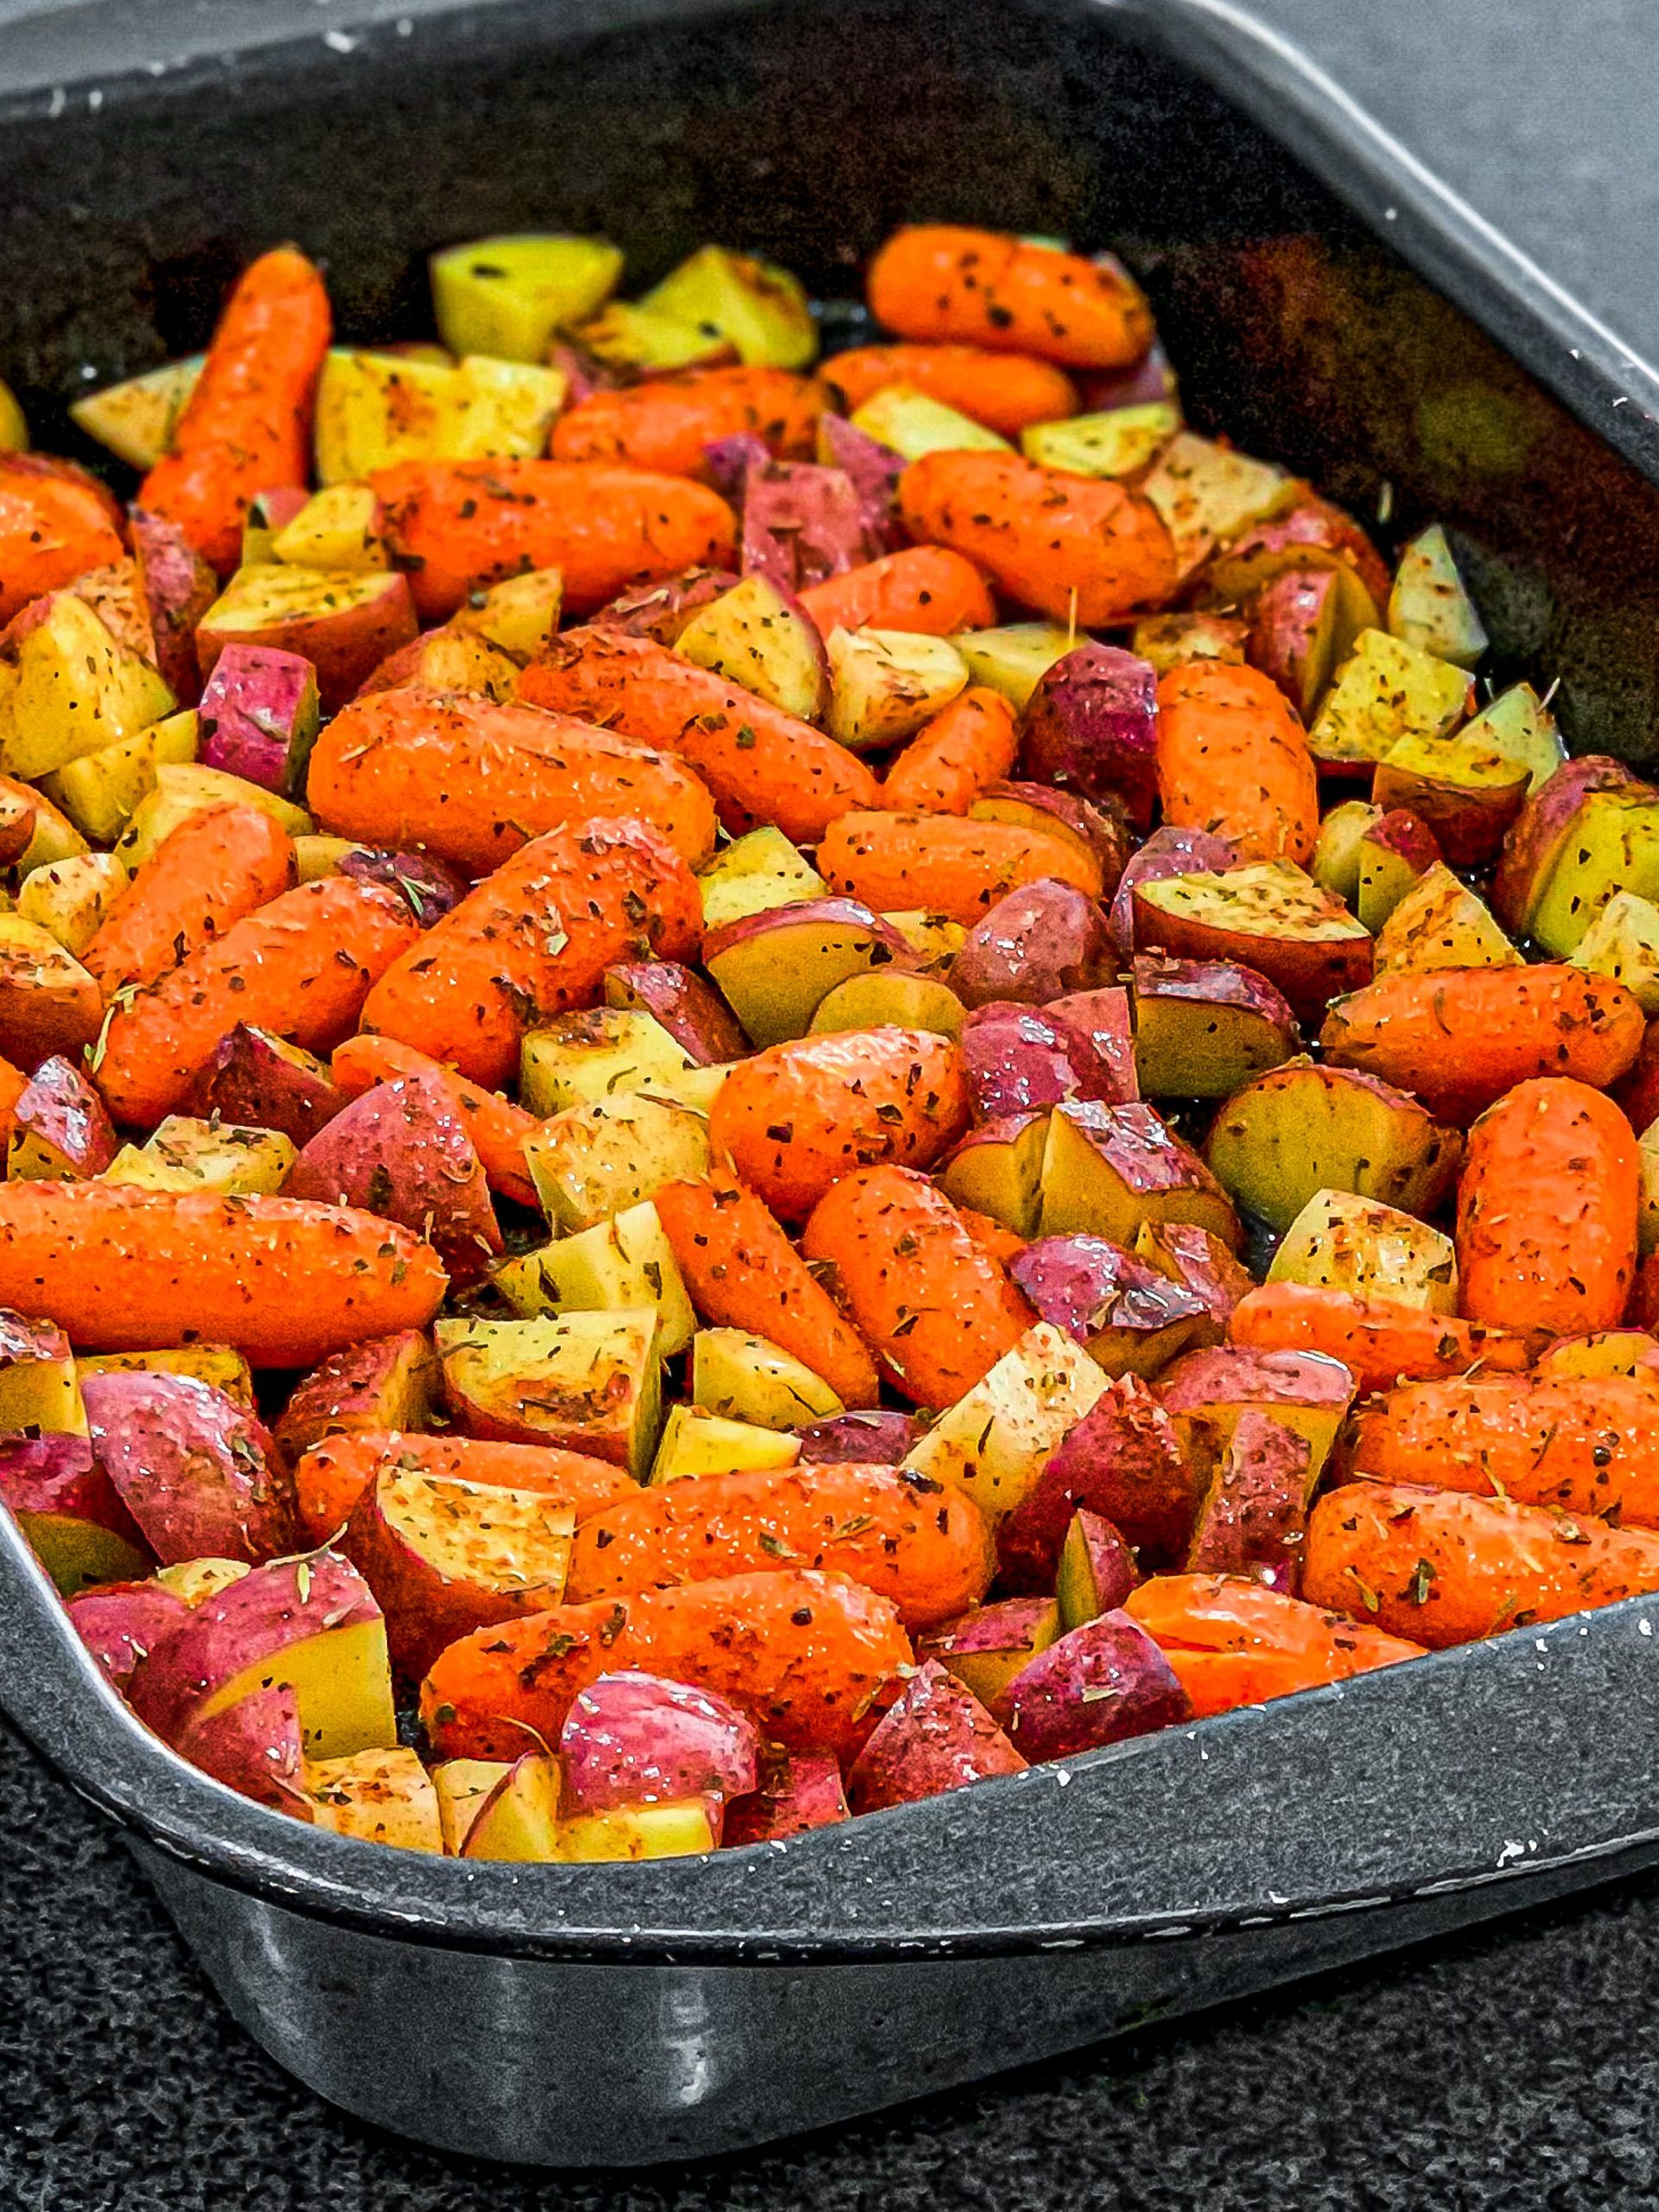 Sprinkle half of the mixed dry herbs over the top of the carrots and potatoes and toss until evenly coated.